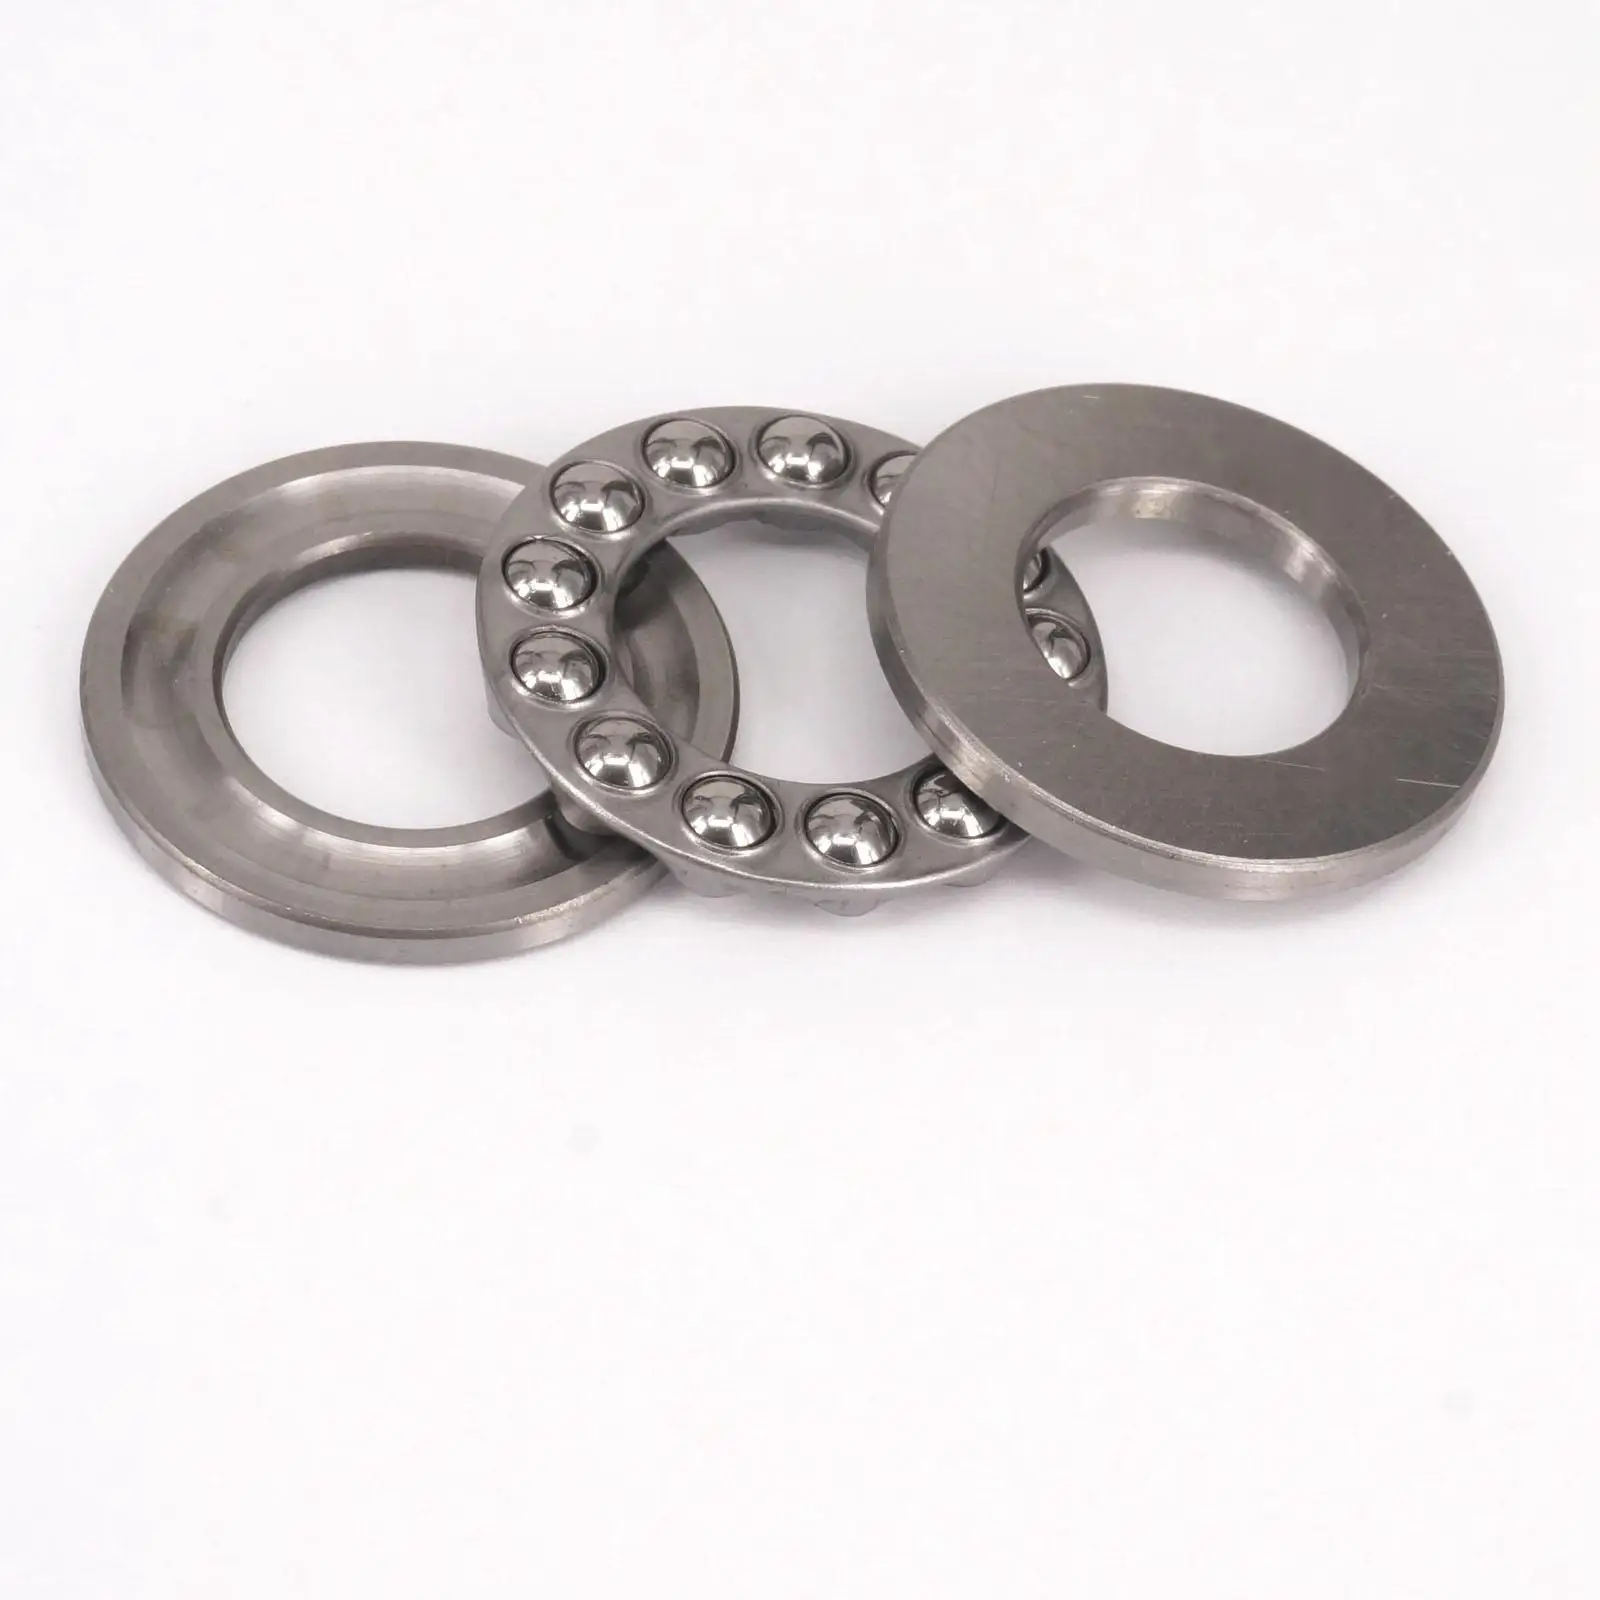 Details about   51208 40x68x19mm Axial Ball Thrust Bearing Set ABEC-1 2 Steel Races + 1 Cage 